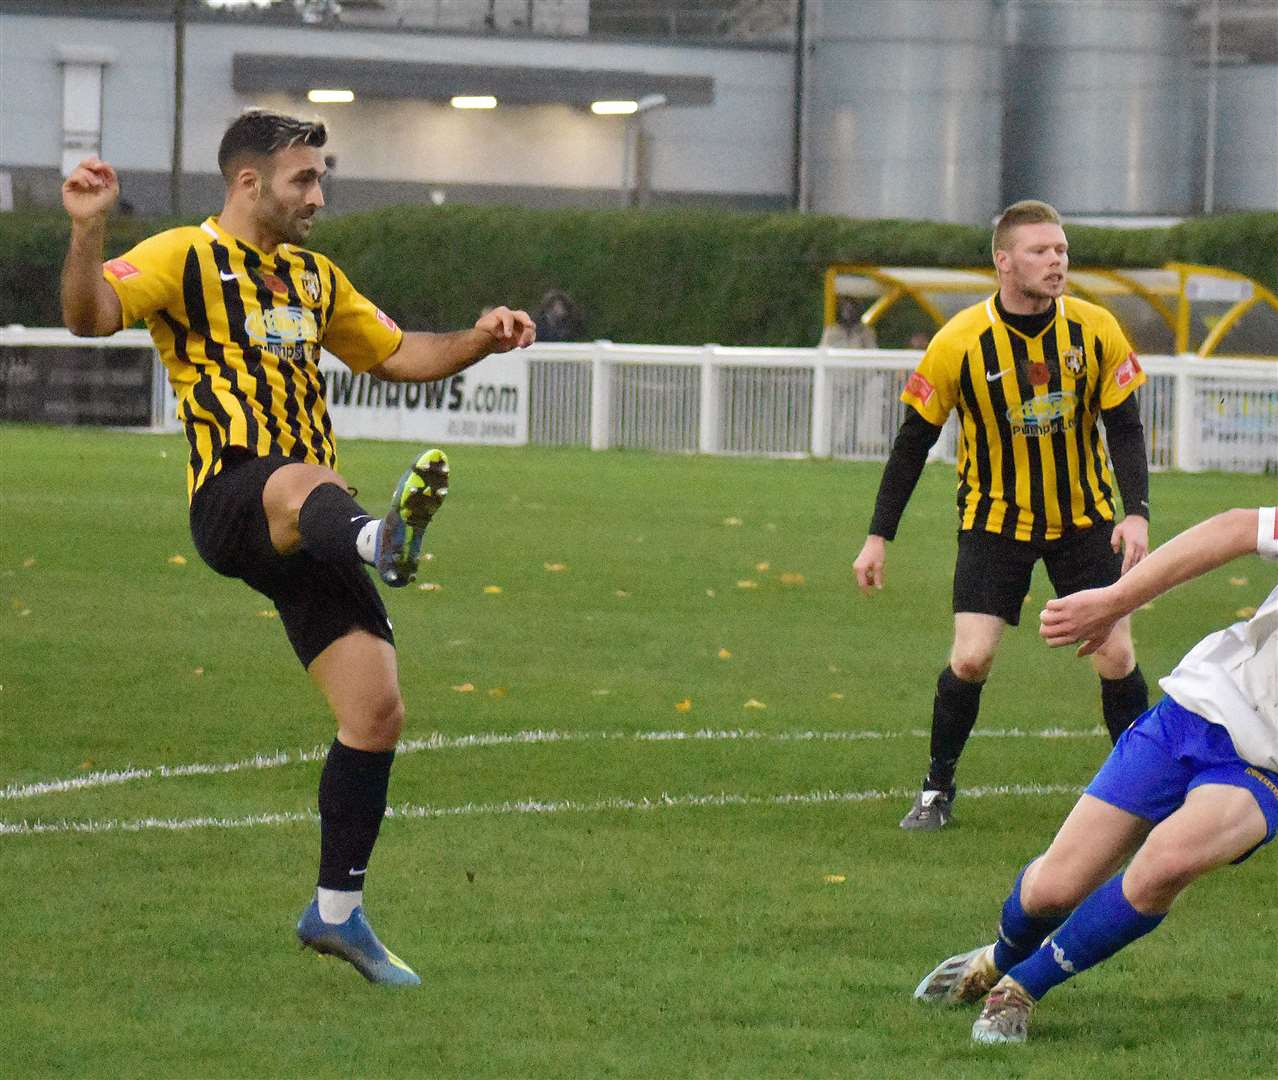 Kieron McCann, who also scored a hat-trick at Wingate & Finchley on Tuesday, firing home Invicta's first in the FA Trophy win over Faversham on Saturday. Picture: Randolph File